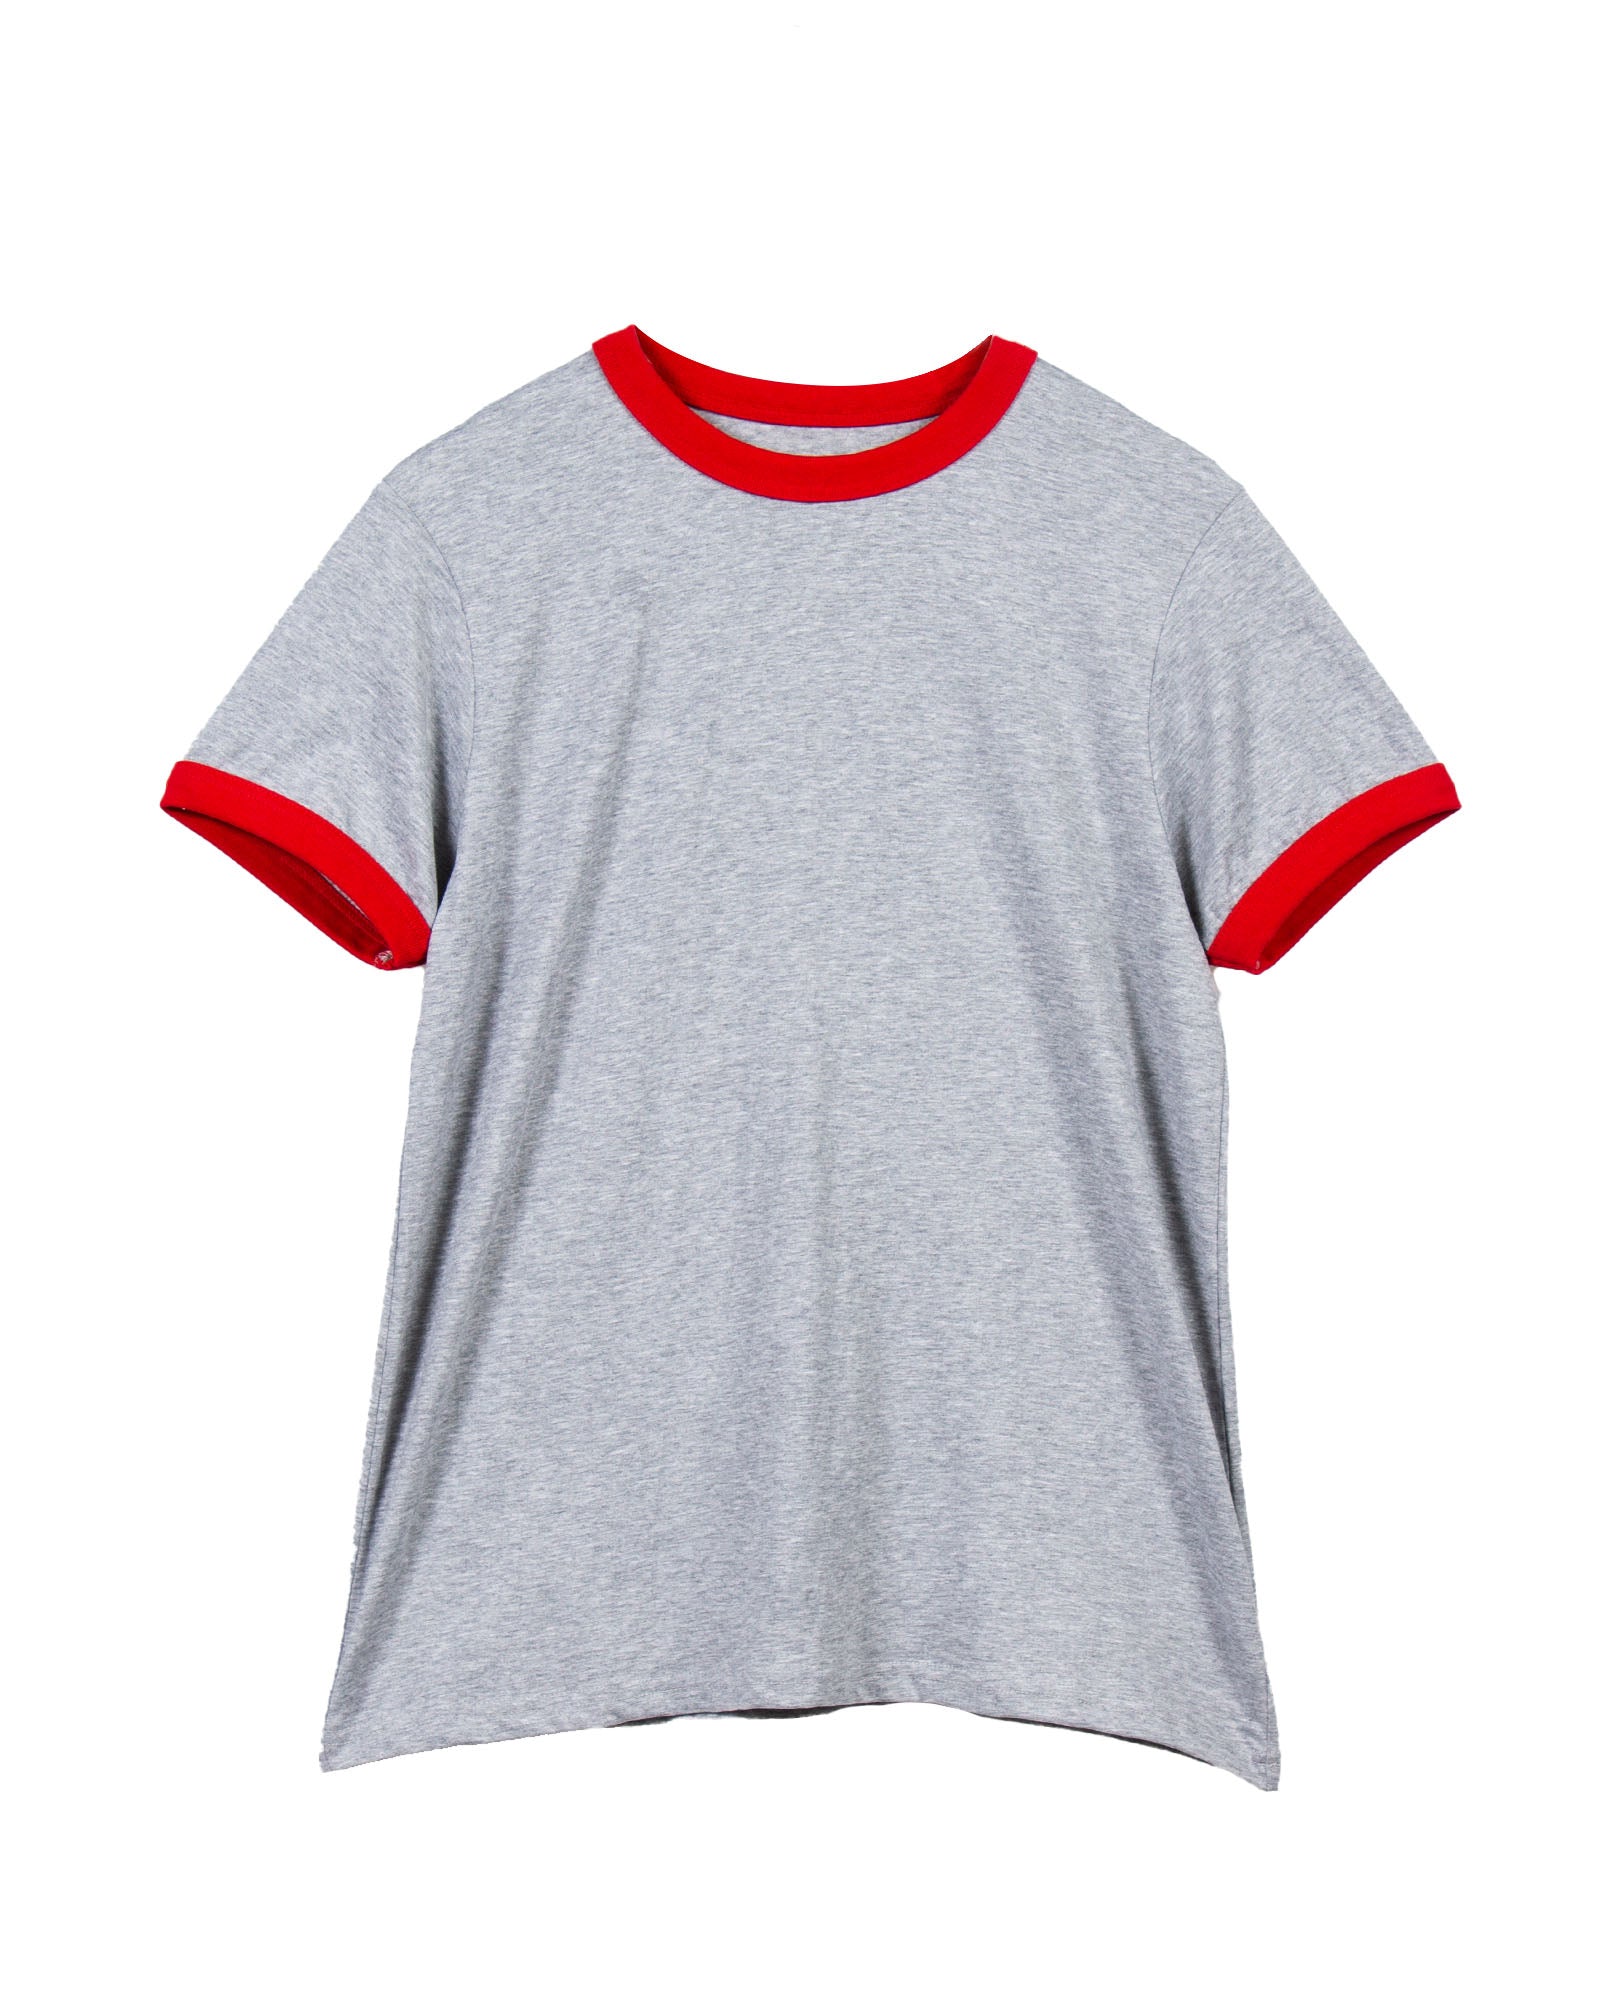 Grey/Red Ringer Tee